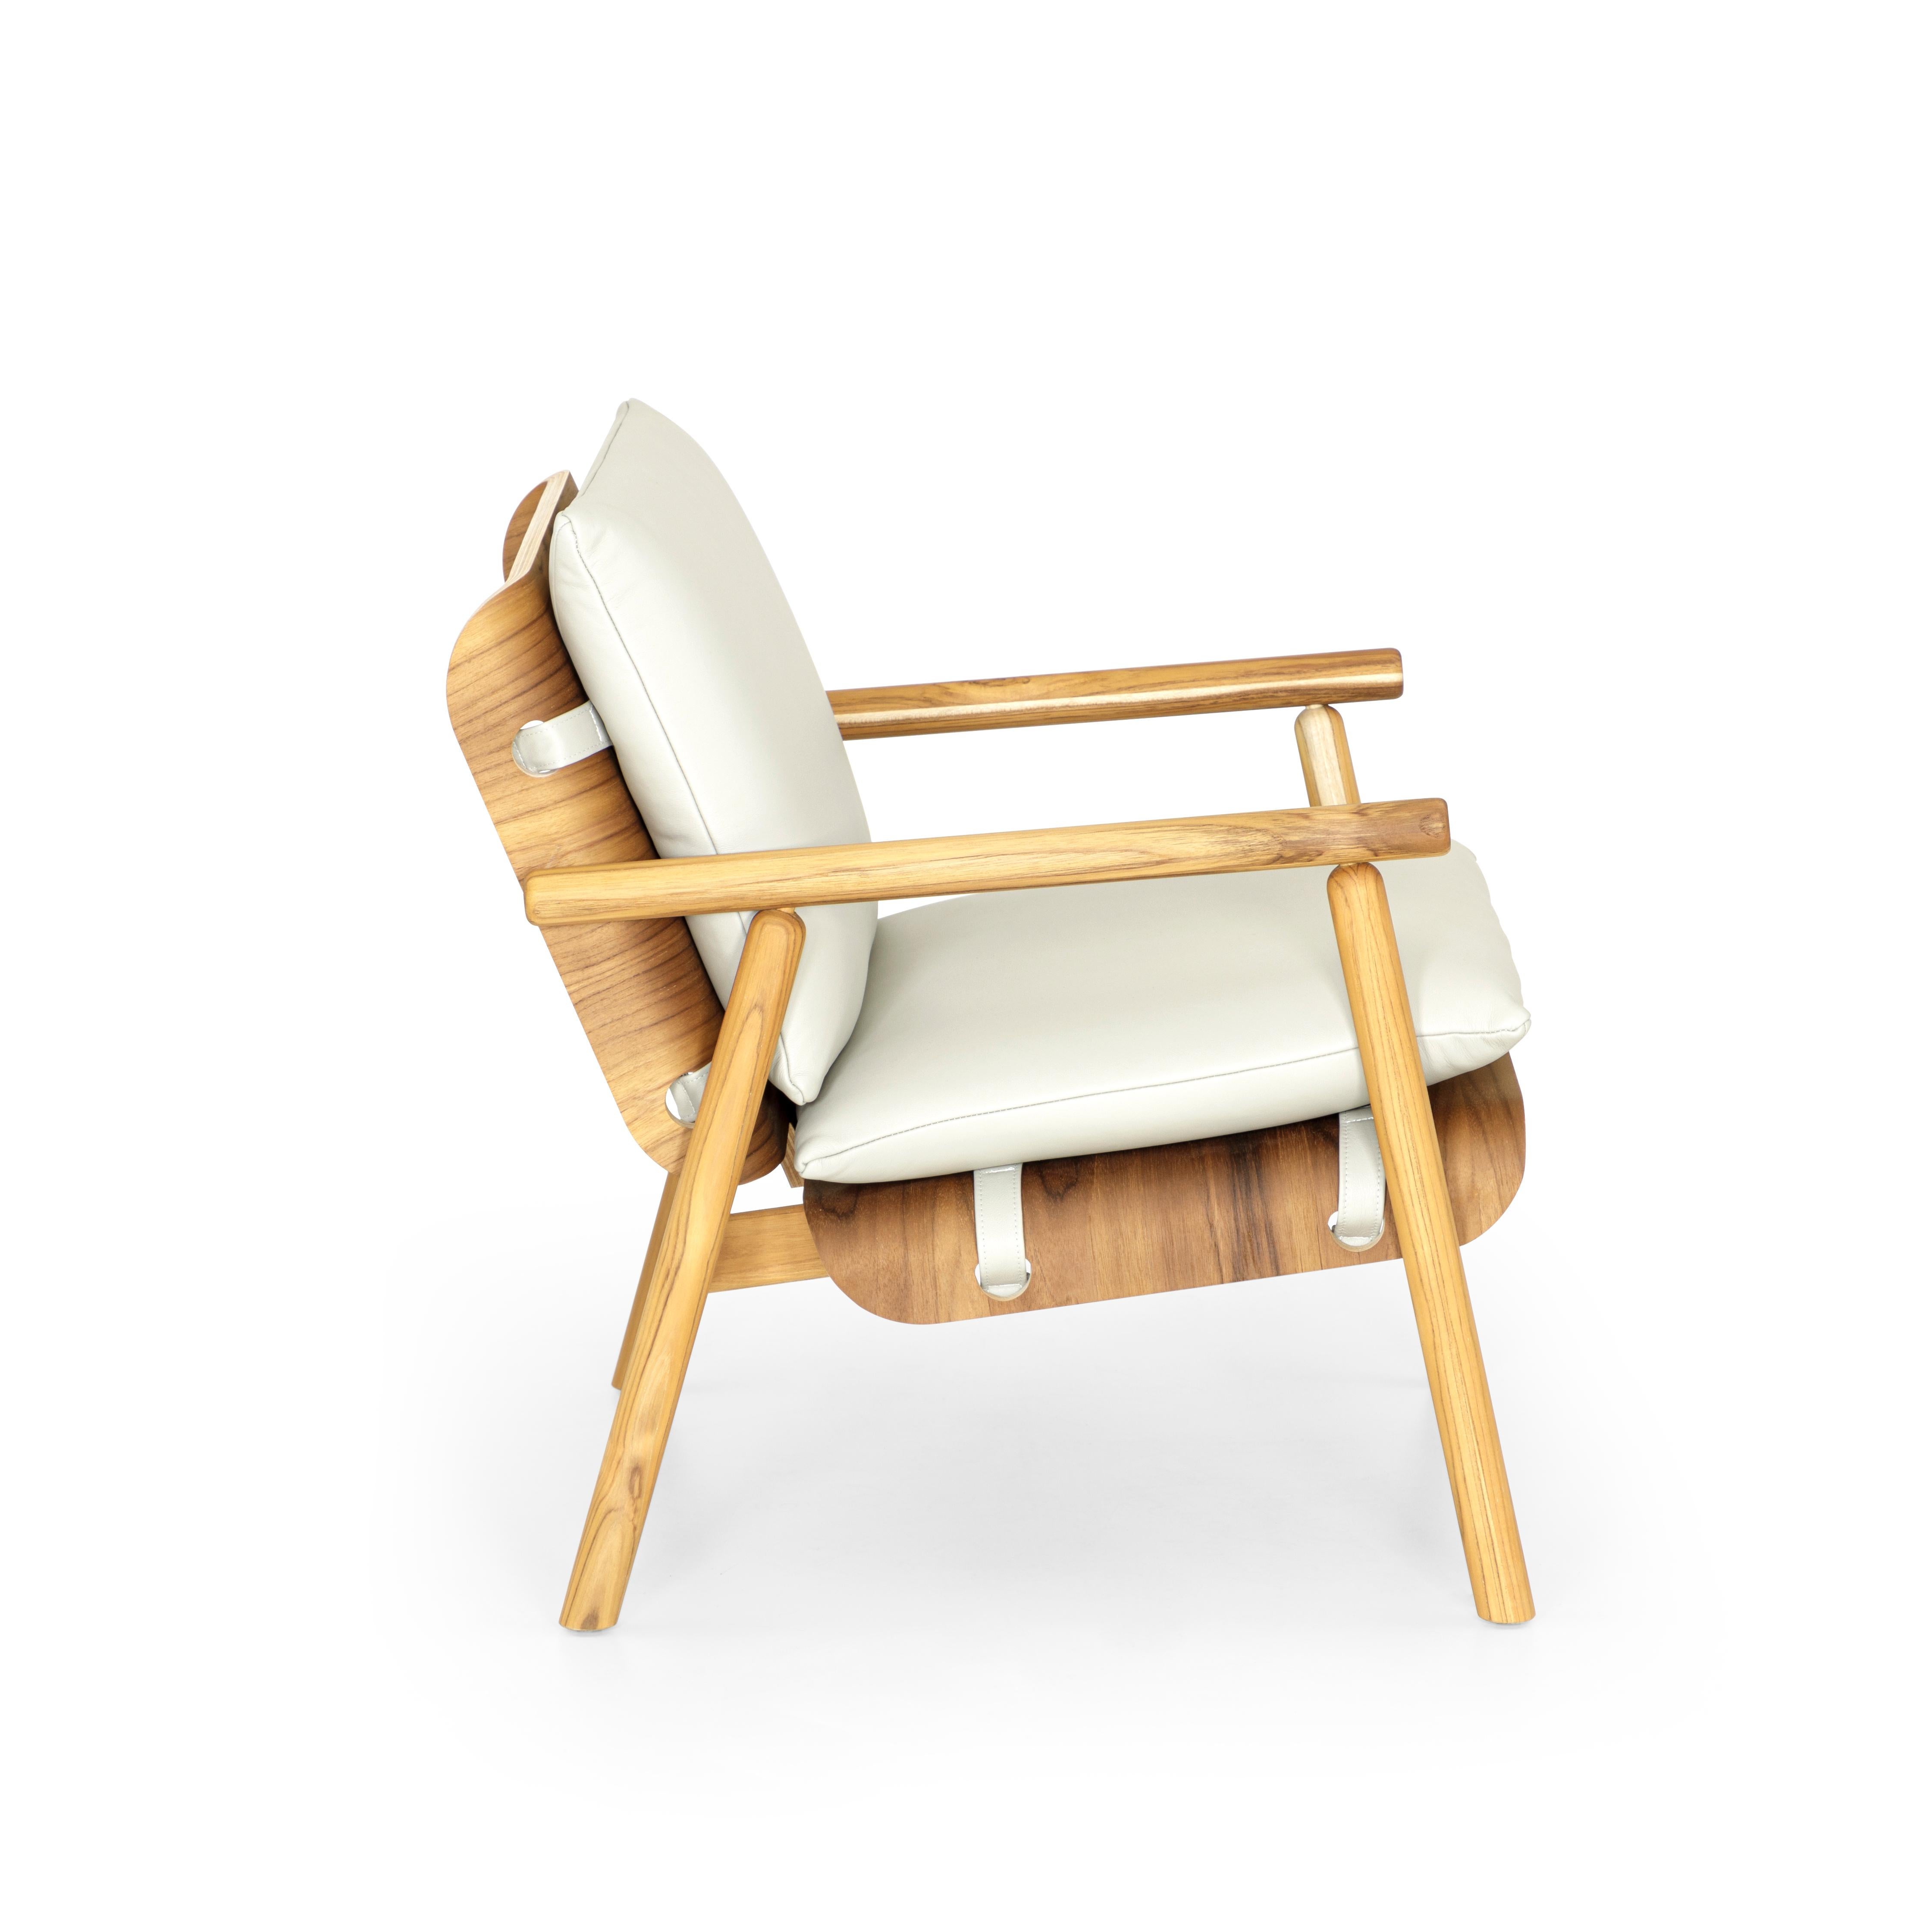 The Tai armchair has a lot going on but in a very simplistic way with the beautiful wood frame in a teak finish and its off-white leather cushions. The unique 